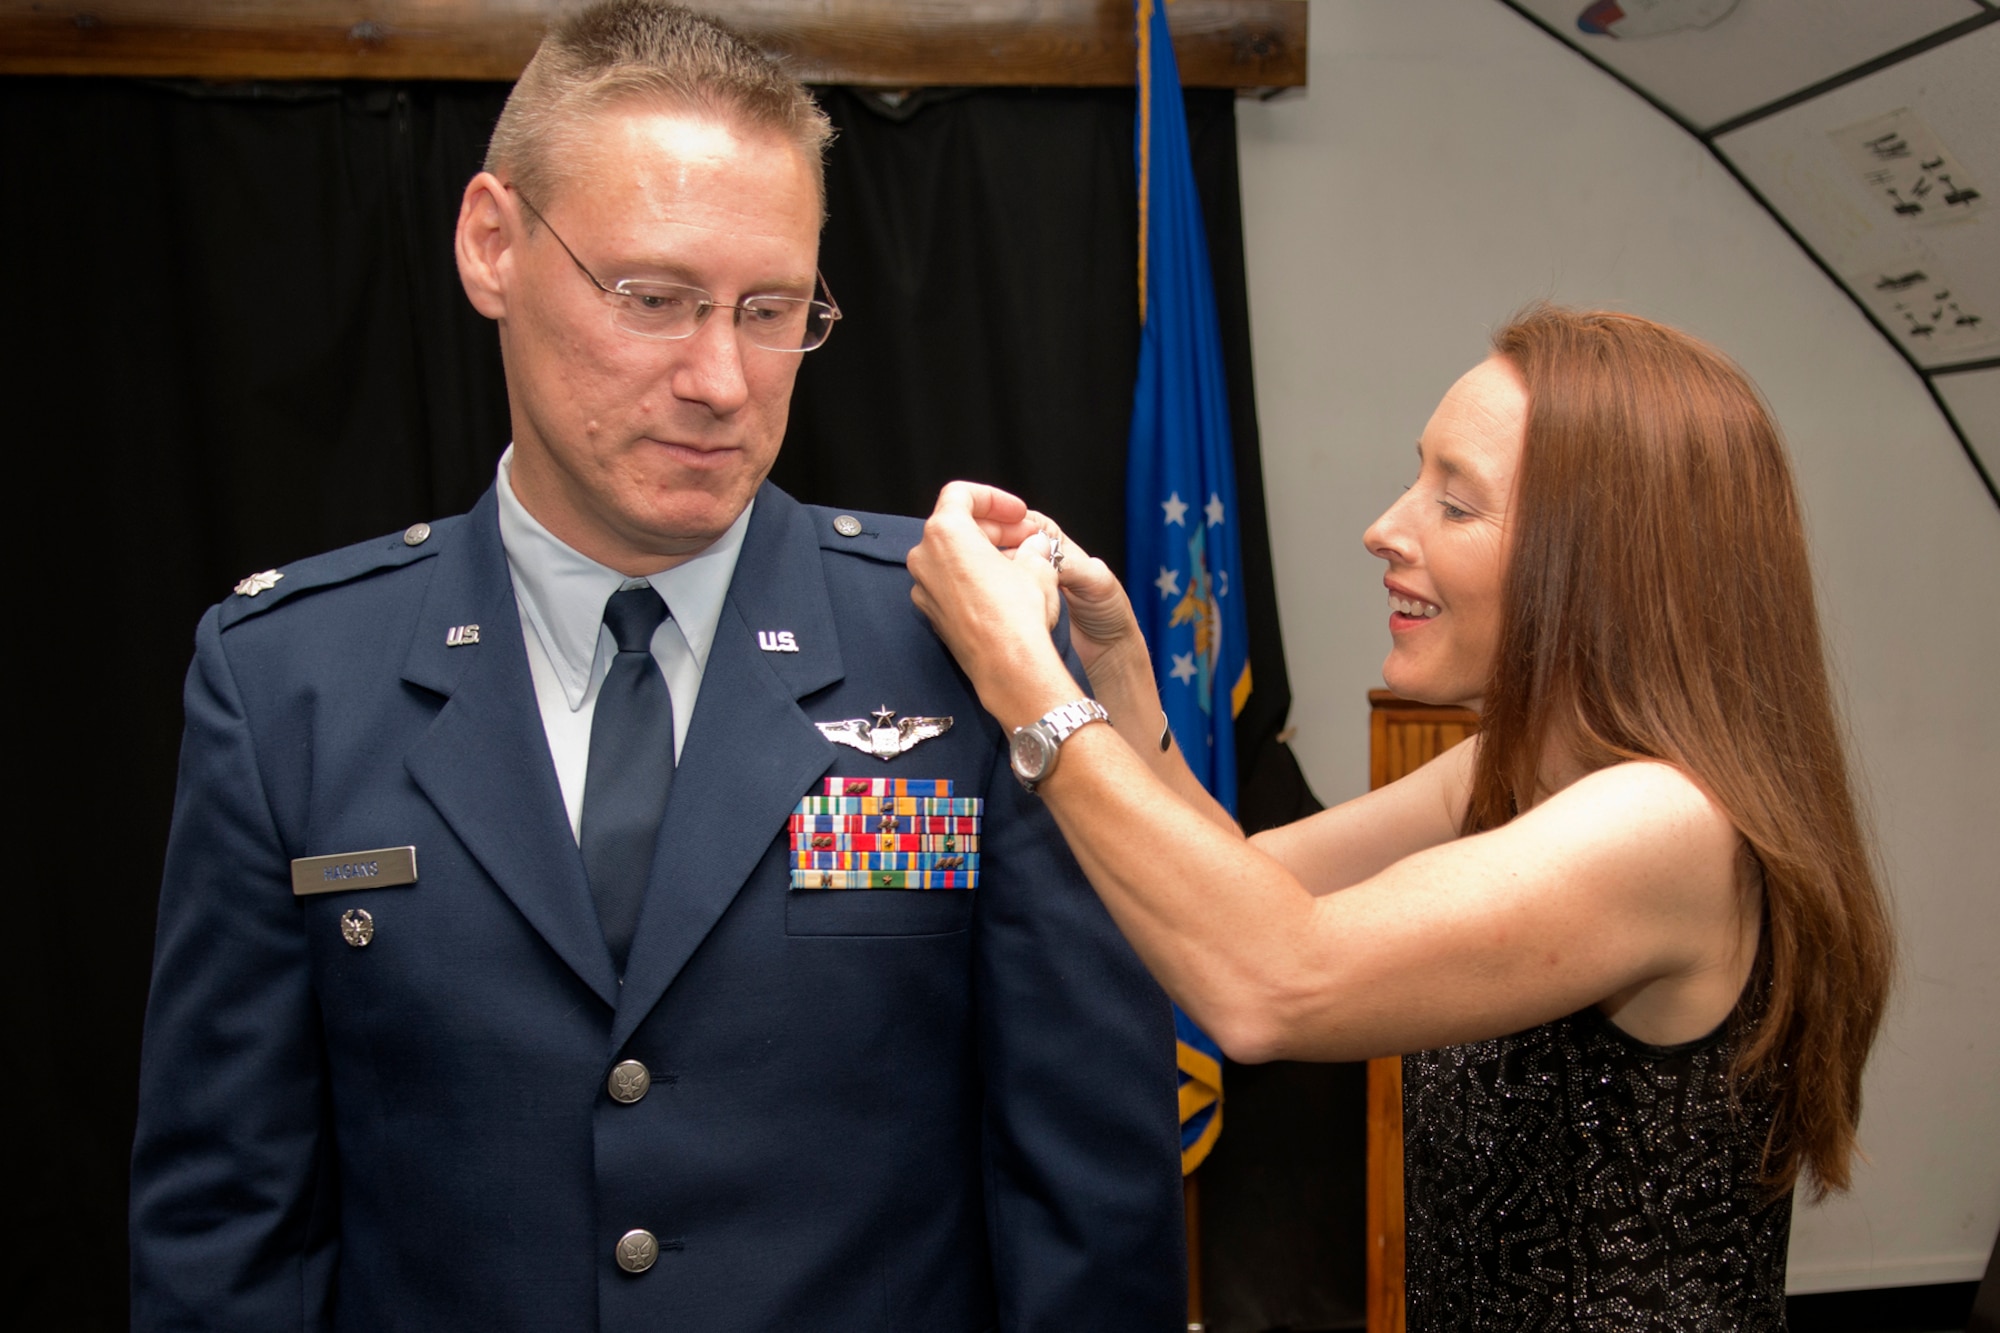 U.S. Air Force Lt. Col. Joseph Hagans gets pinned by his wife Miranda during a ceremony on Sept. 28, 2012, Barksdale Air Force Base, La. Hagans was recently promoted to Lt. Col. and is assigned to the 343rd Bomb Squadron at Barksdale. (U.S. Air Force photo by Master Sgt. Greg Steele/Released)